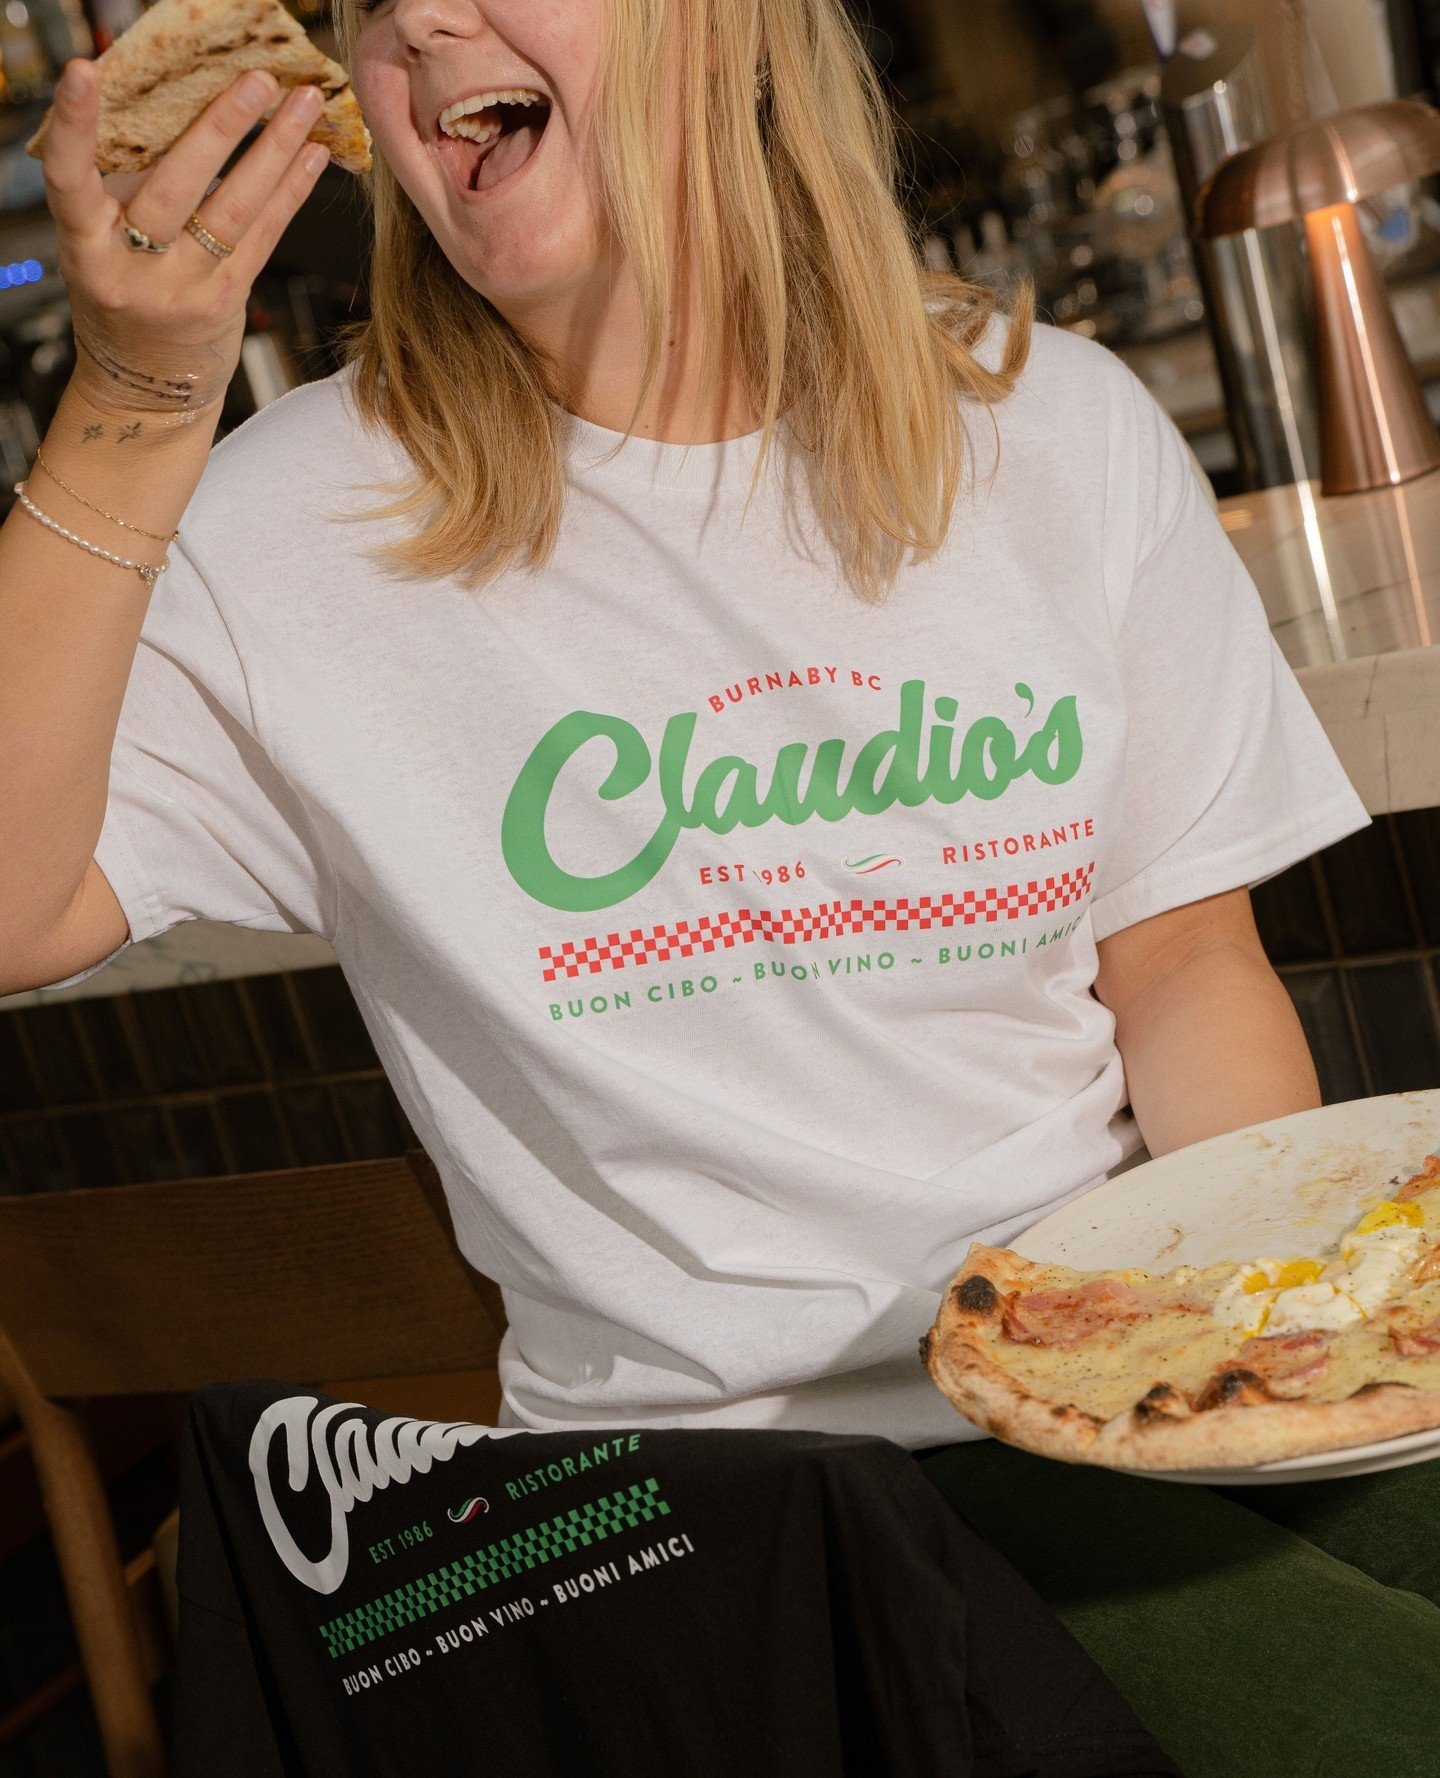 Show your love for Claudios in the best way possible.⁠
⁠
Get your merch while supplies last!